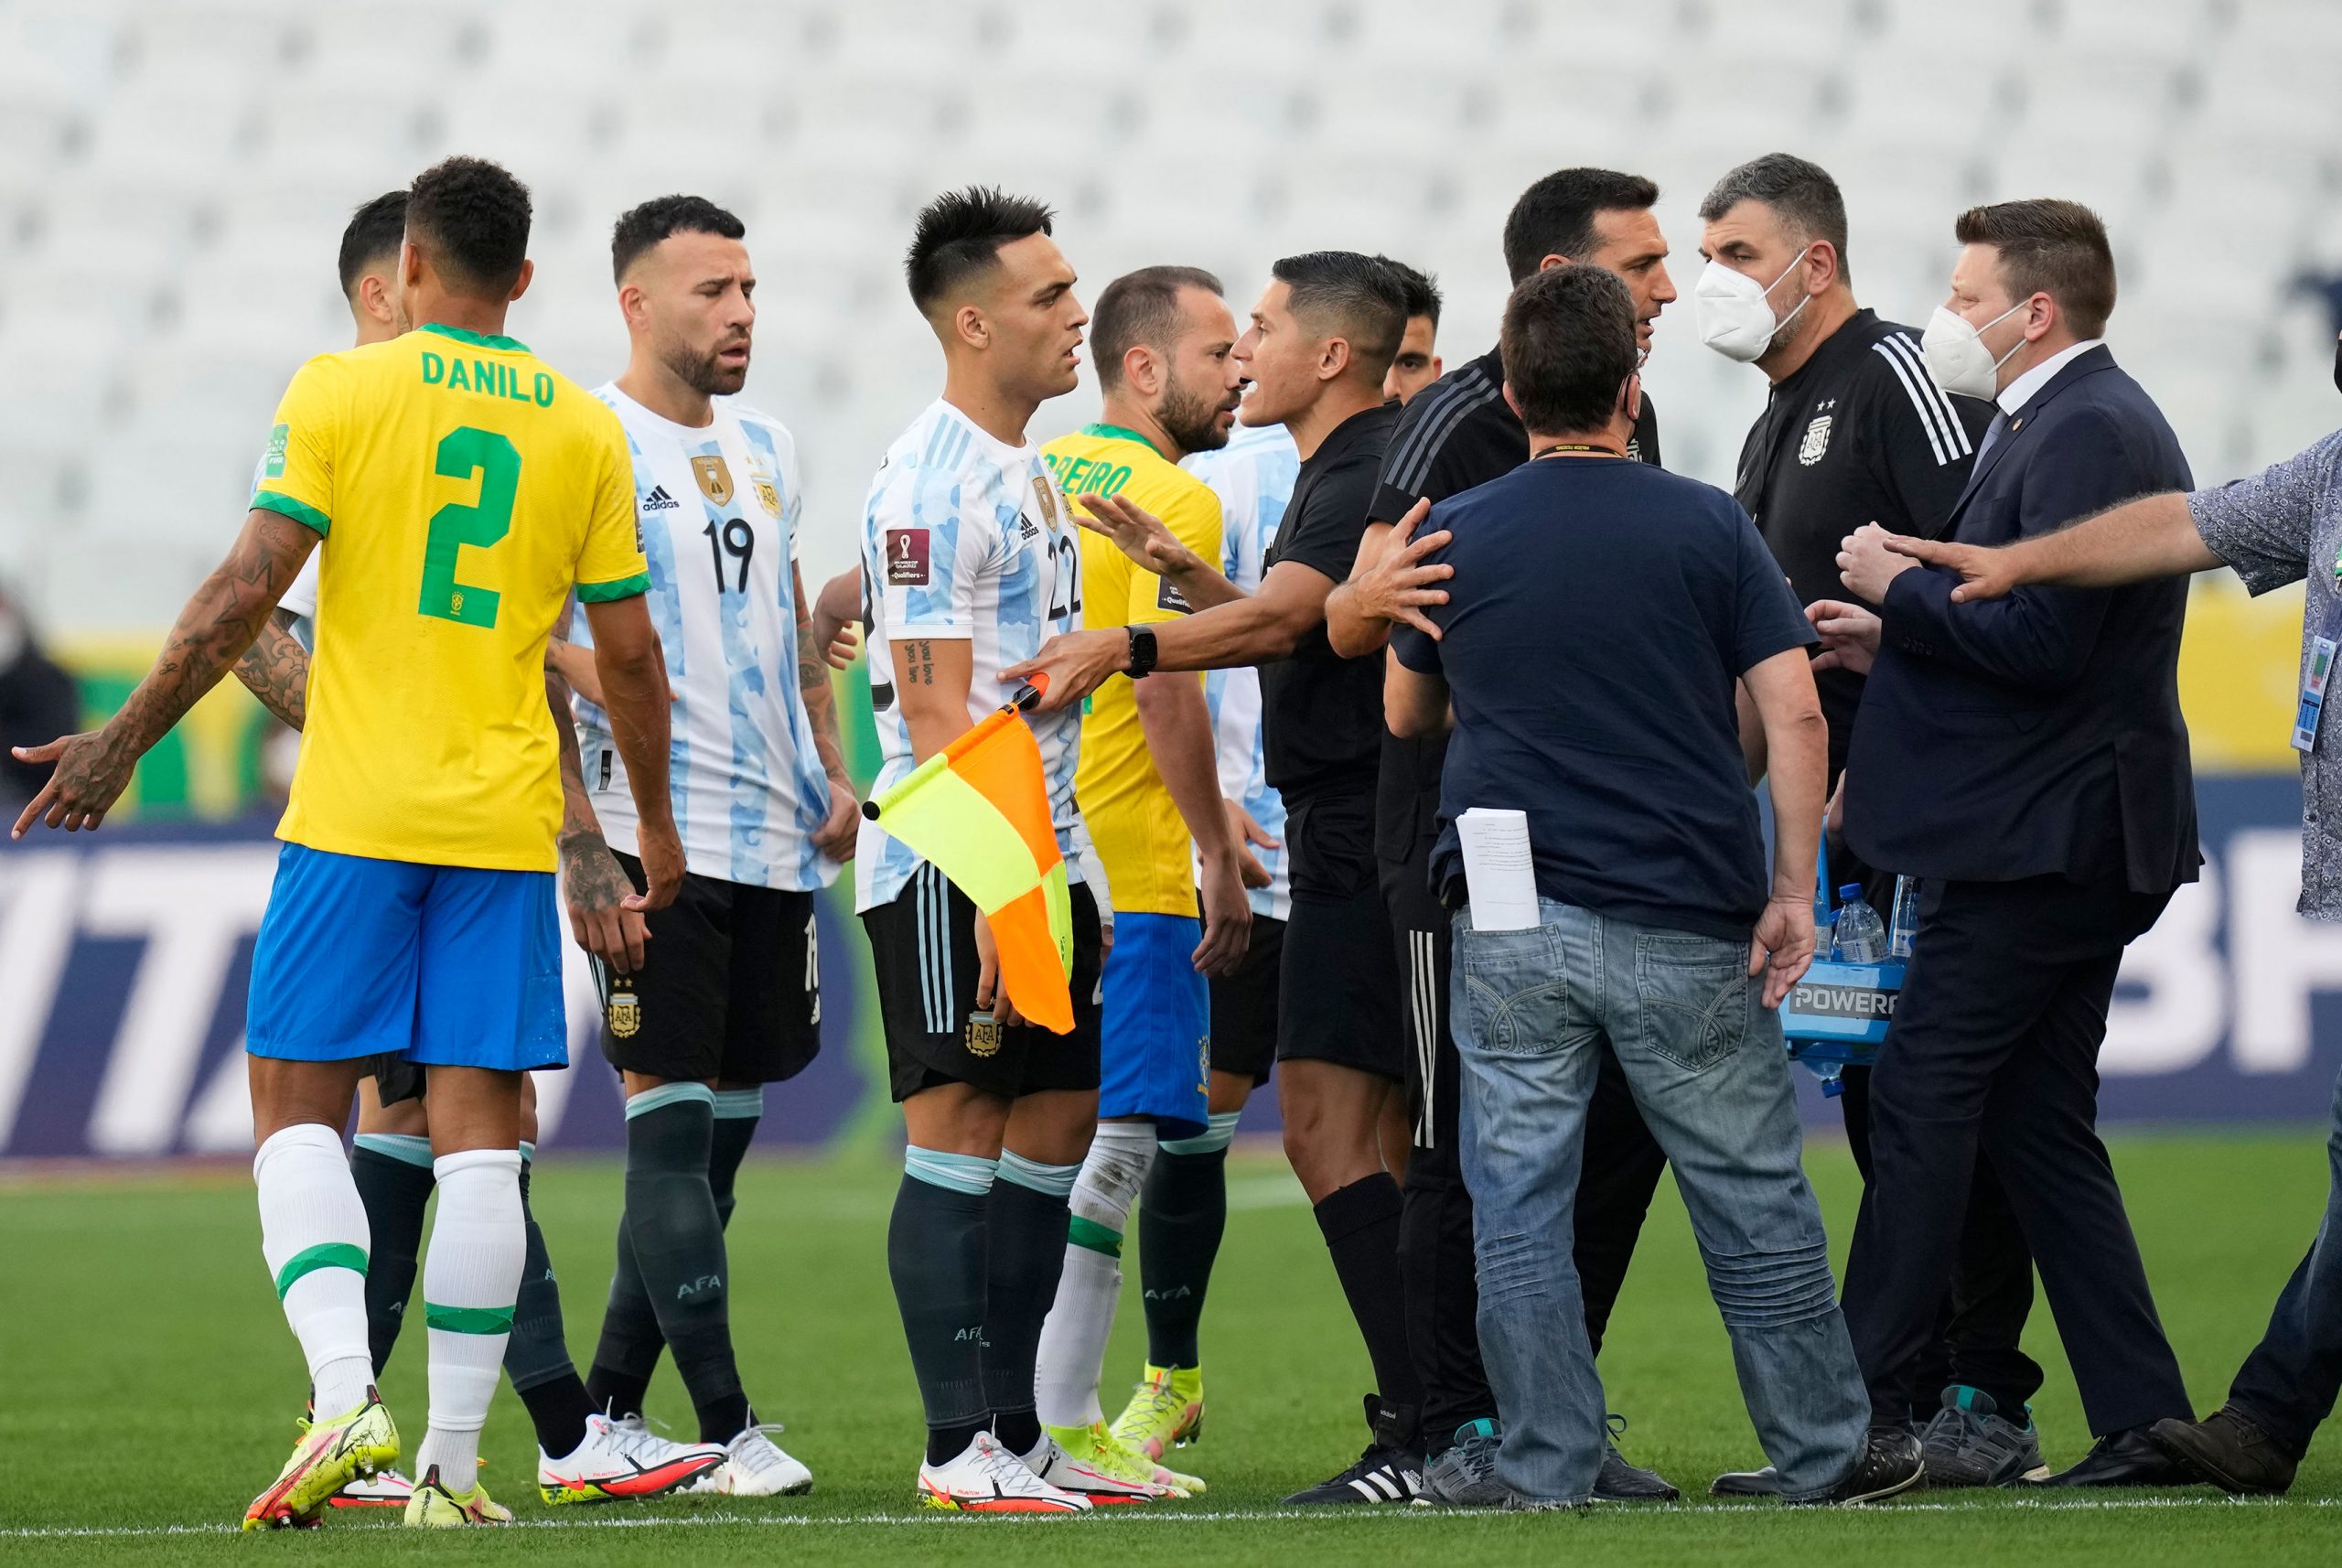 Health agency blames football bodies, CONMEBOL for chaos at Brazil, Argentina match